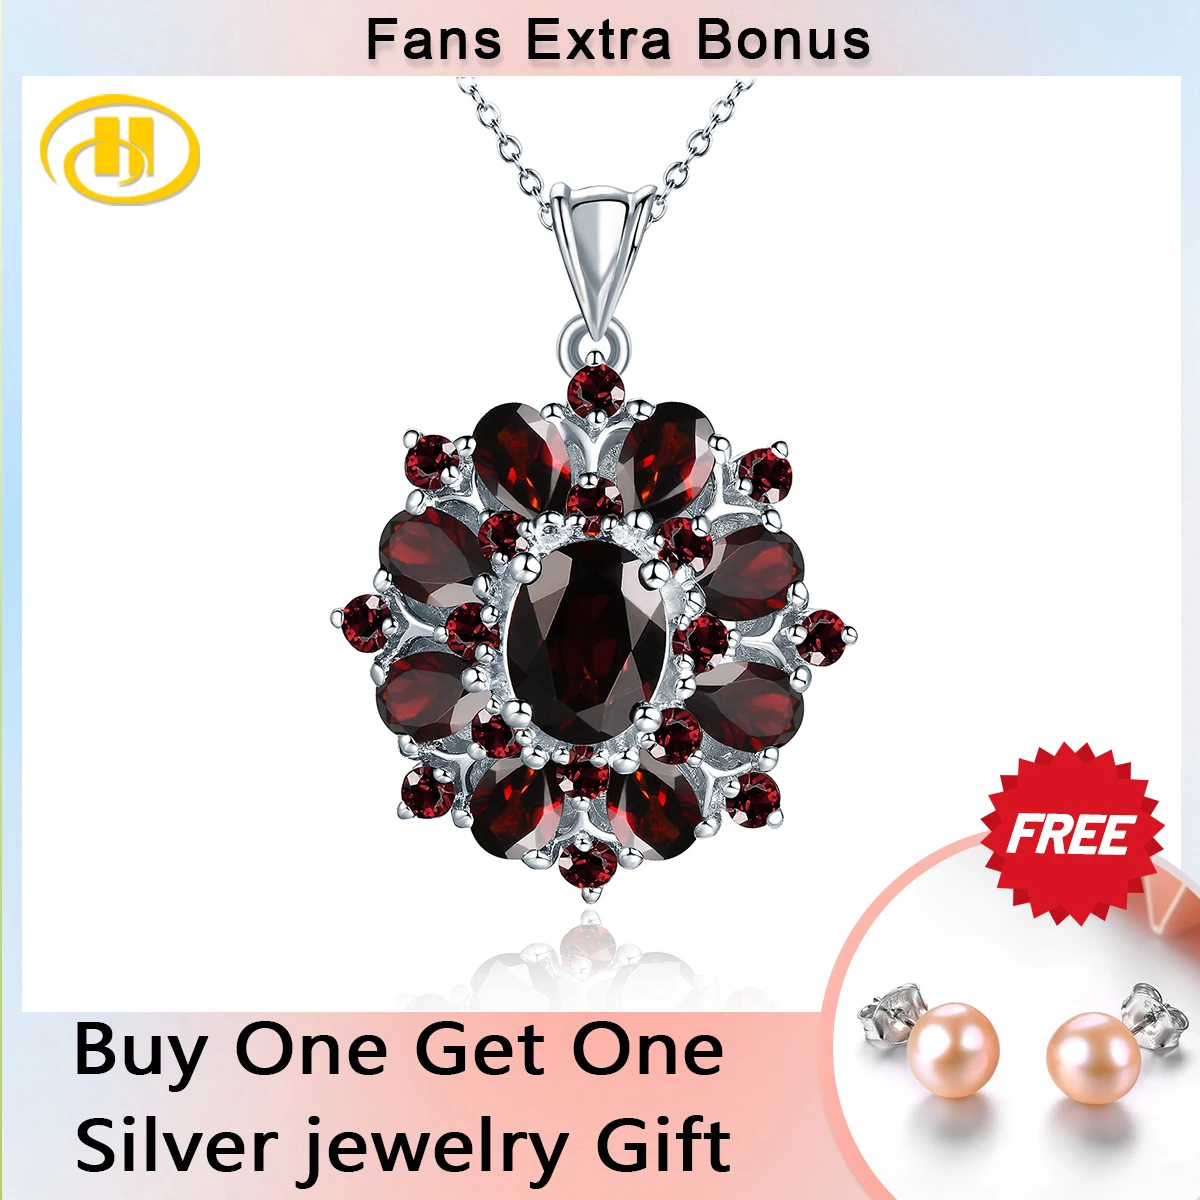 Hutang 7.54ct Natural Black Garnet Pendant, 925 Sterling Silver Necklace Fine Gemstone Jewelry for Women, Gift for Christmas